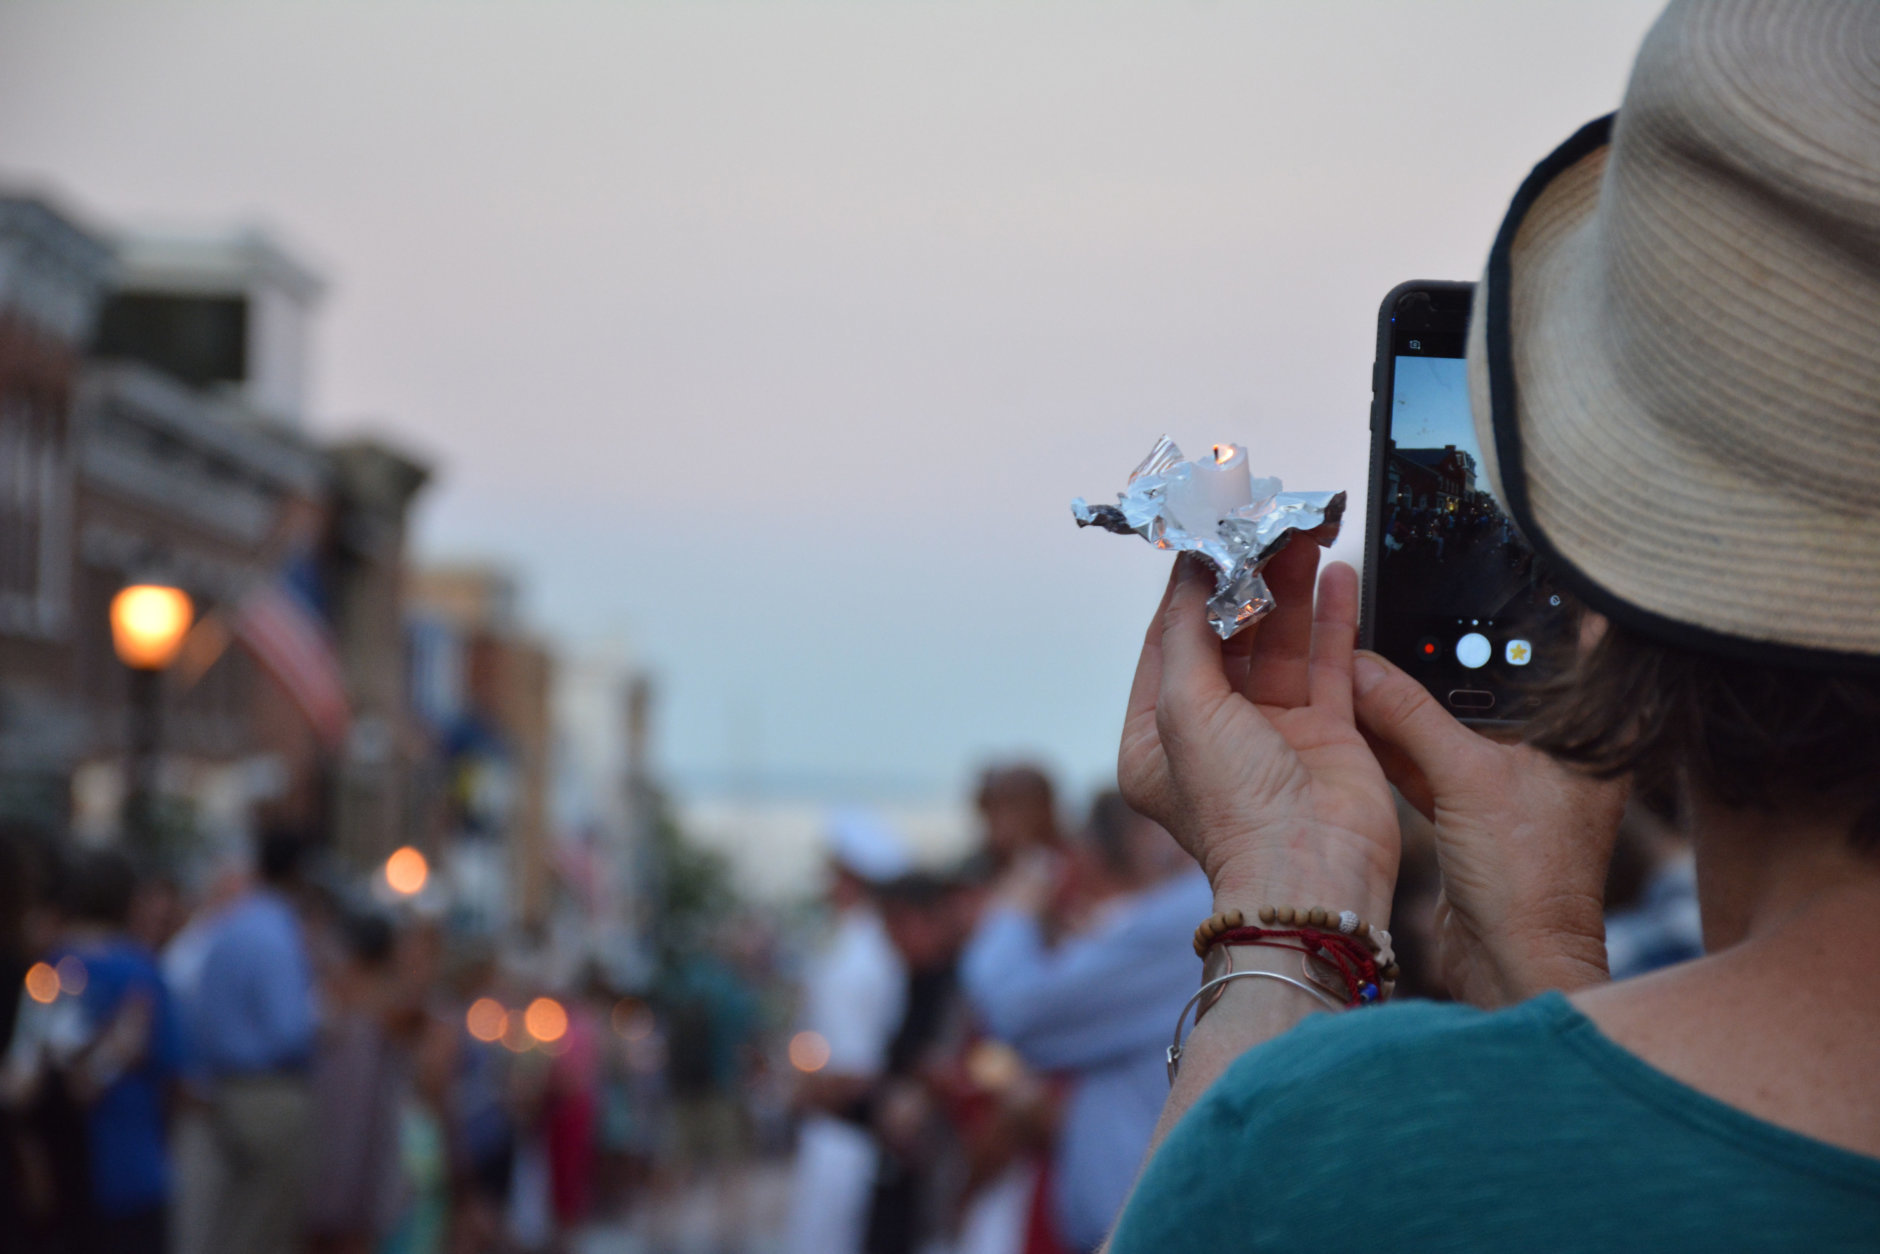 An onlooker takes a photo on their smartphone during a Friday vigil in downtown Annapolis for victims killed in a shooting at the Capital Gazette in Annapolis, Maryland. (Courtesy/Bethany Swain)